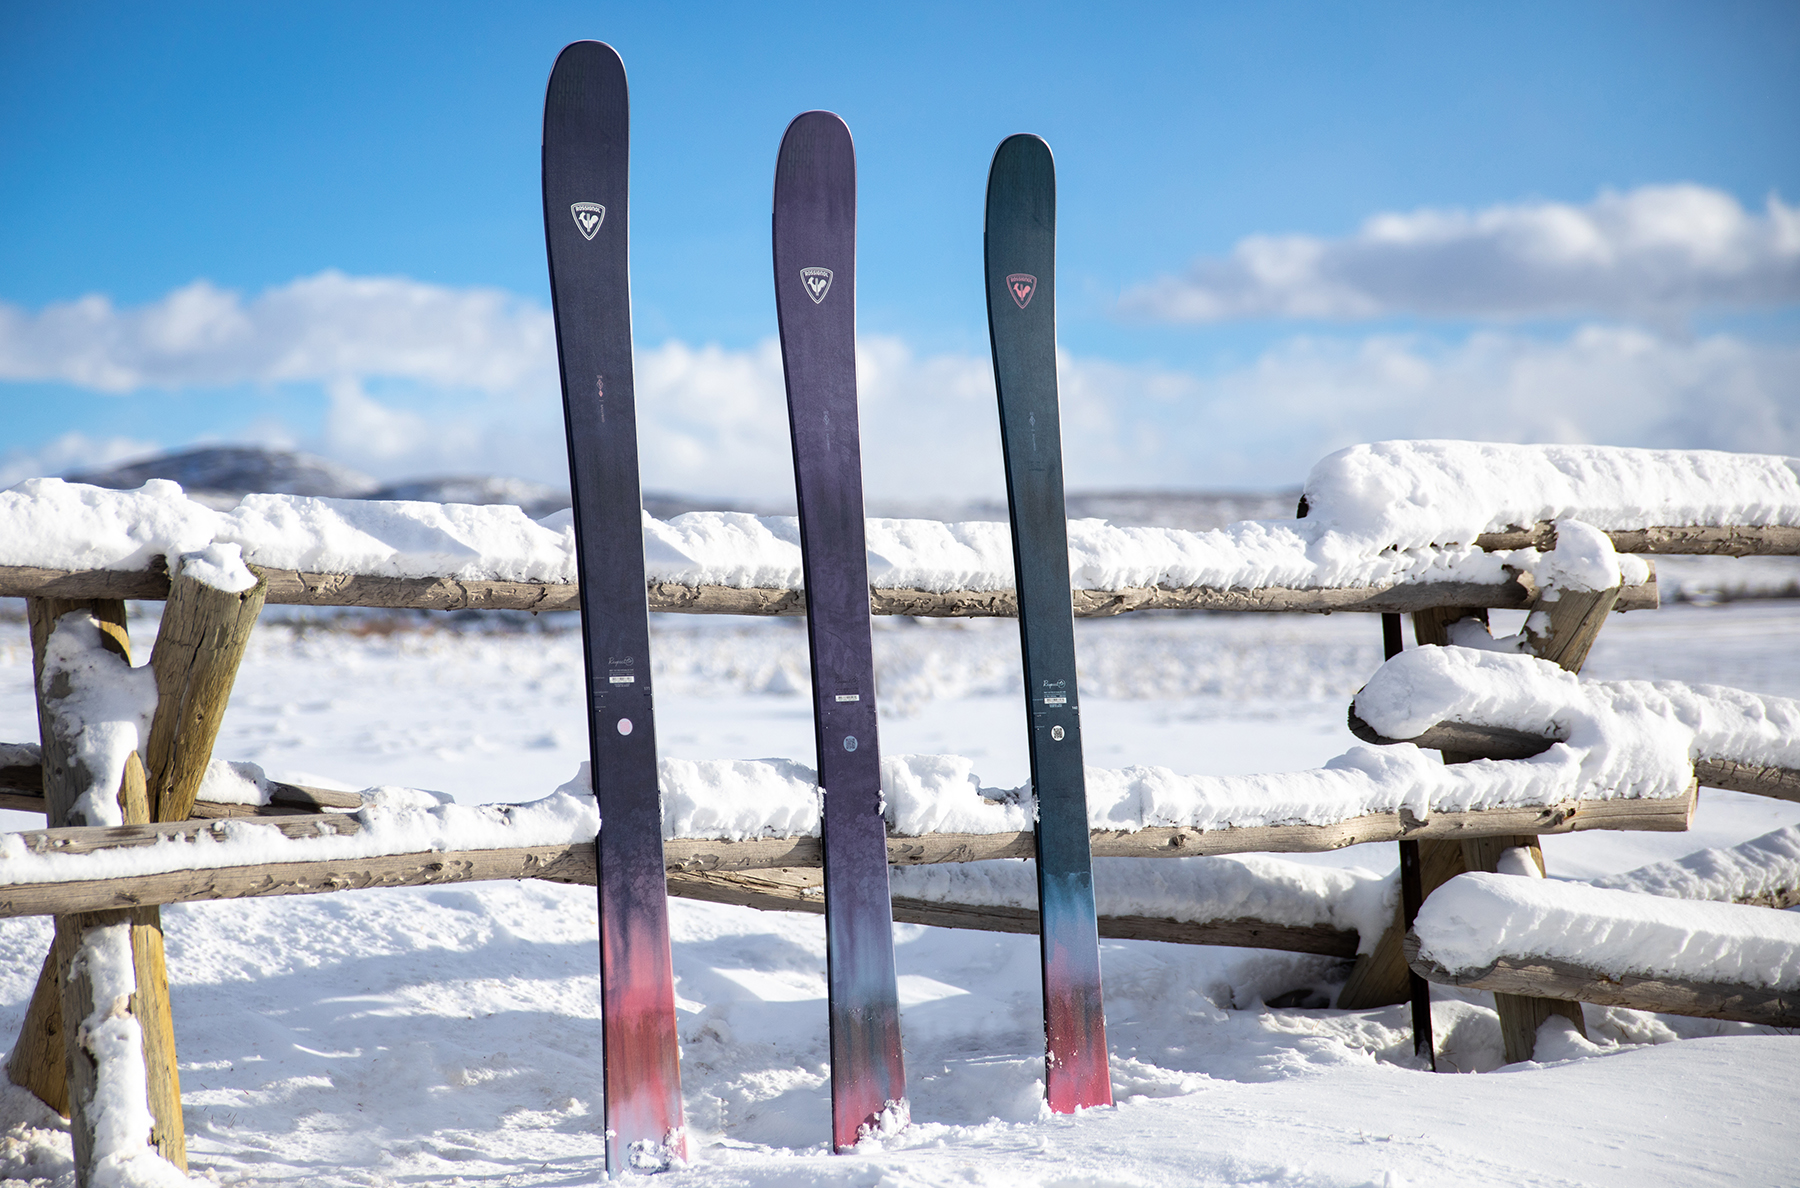 Rossignol Announces 22/23 Sender & Rallybird Skis & HI-SPEED Boots; Blister discusses the details